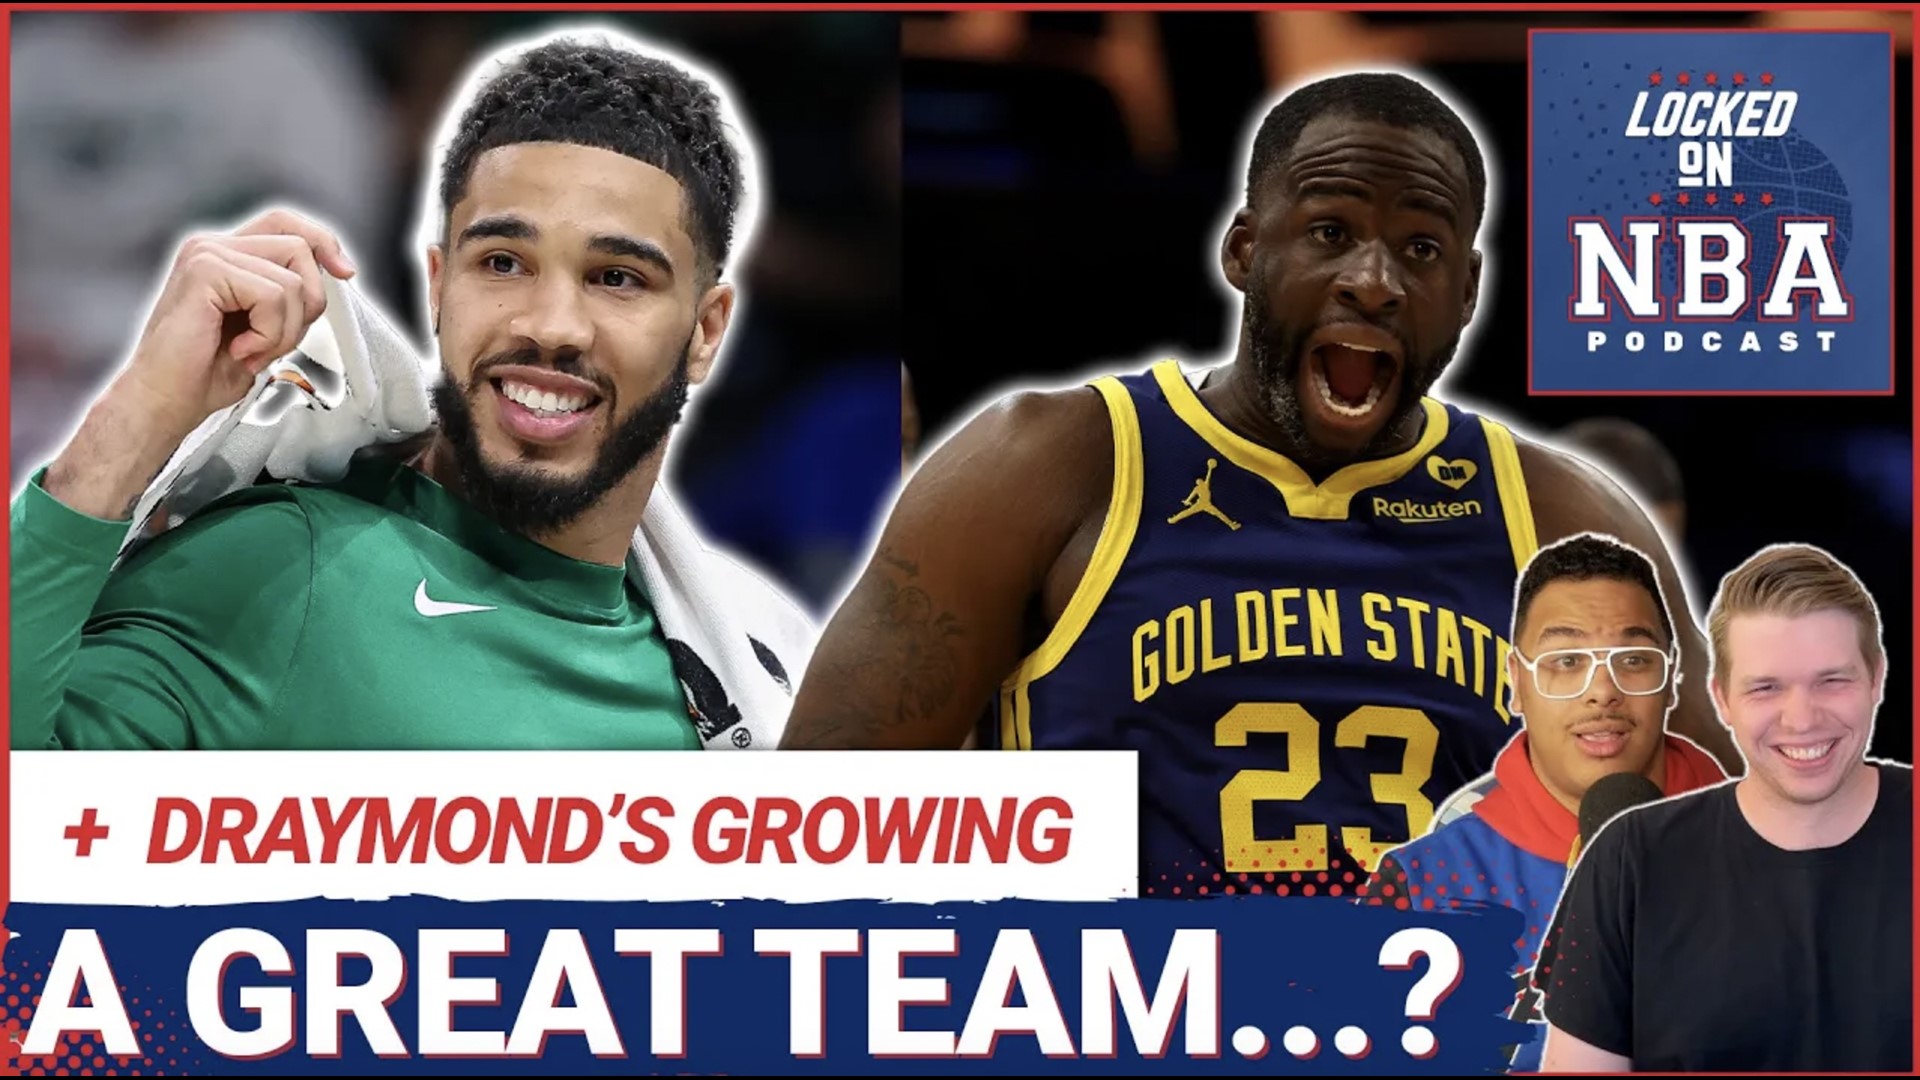 The Boston Celtics got another win behind Jayson Tatum and are on pace for 65-wins this season, why aren't they talked about like a GREAT Team?